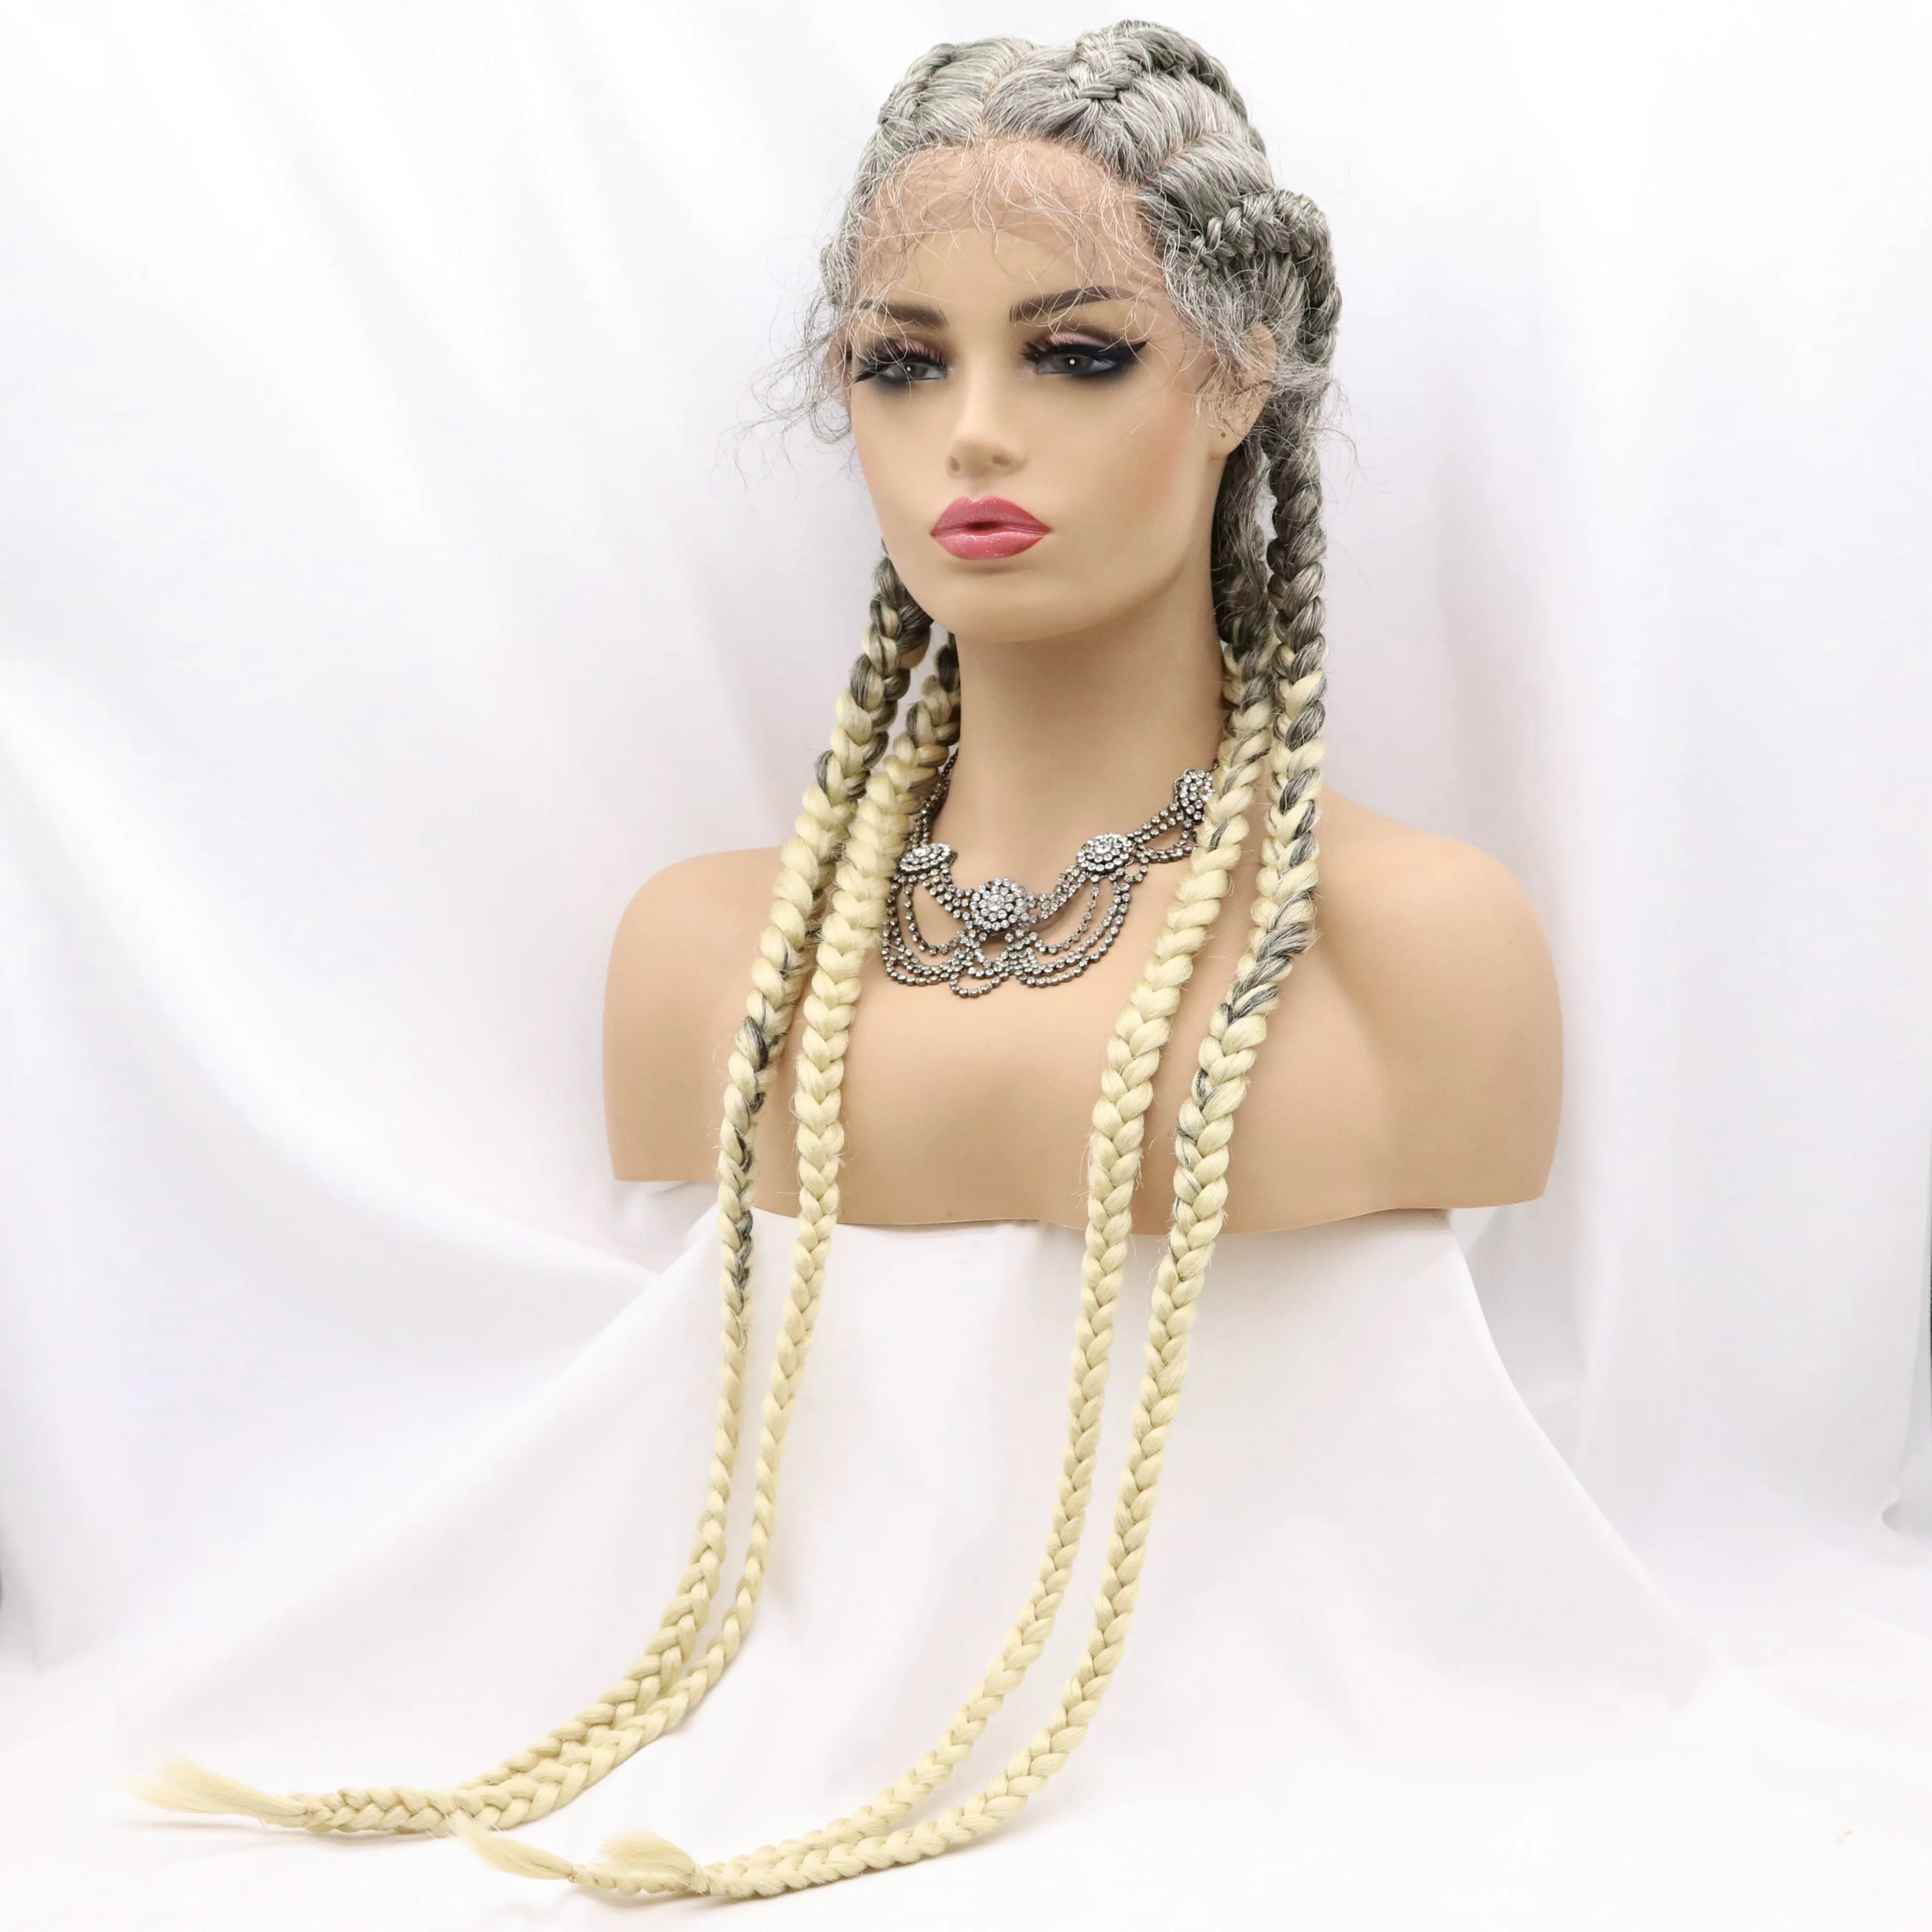 Sylvia 4 Braided Synthetic Lace Front Wigs With Baby Hair Half Black Half Blonde Heat Resistant for Women Cosplay Drag Queen Wig